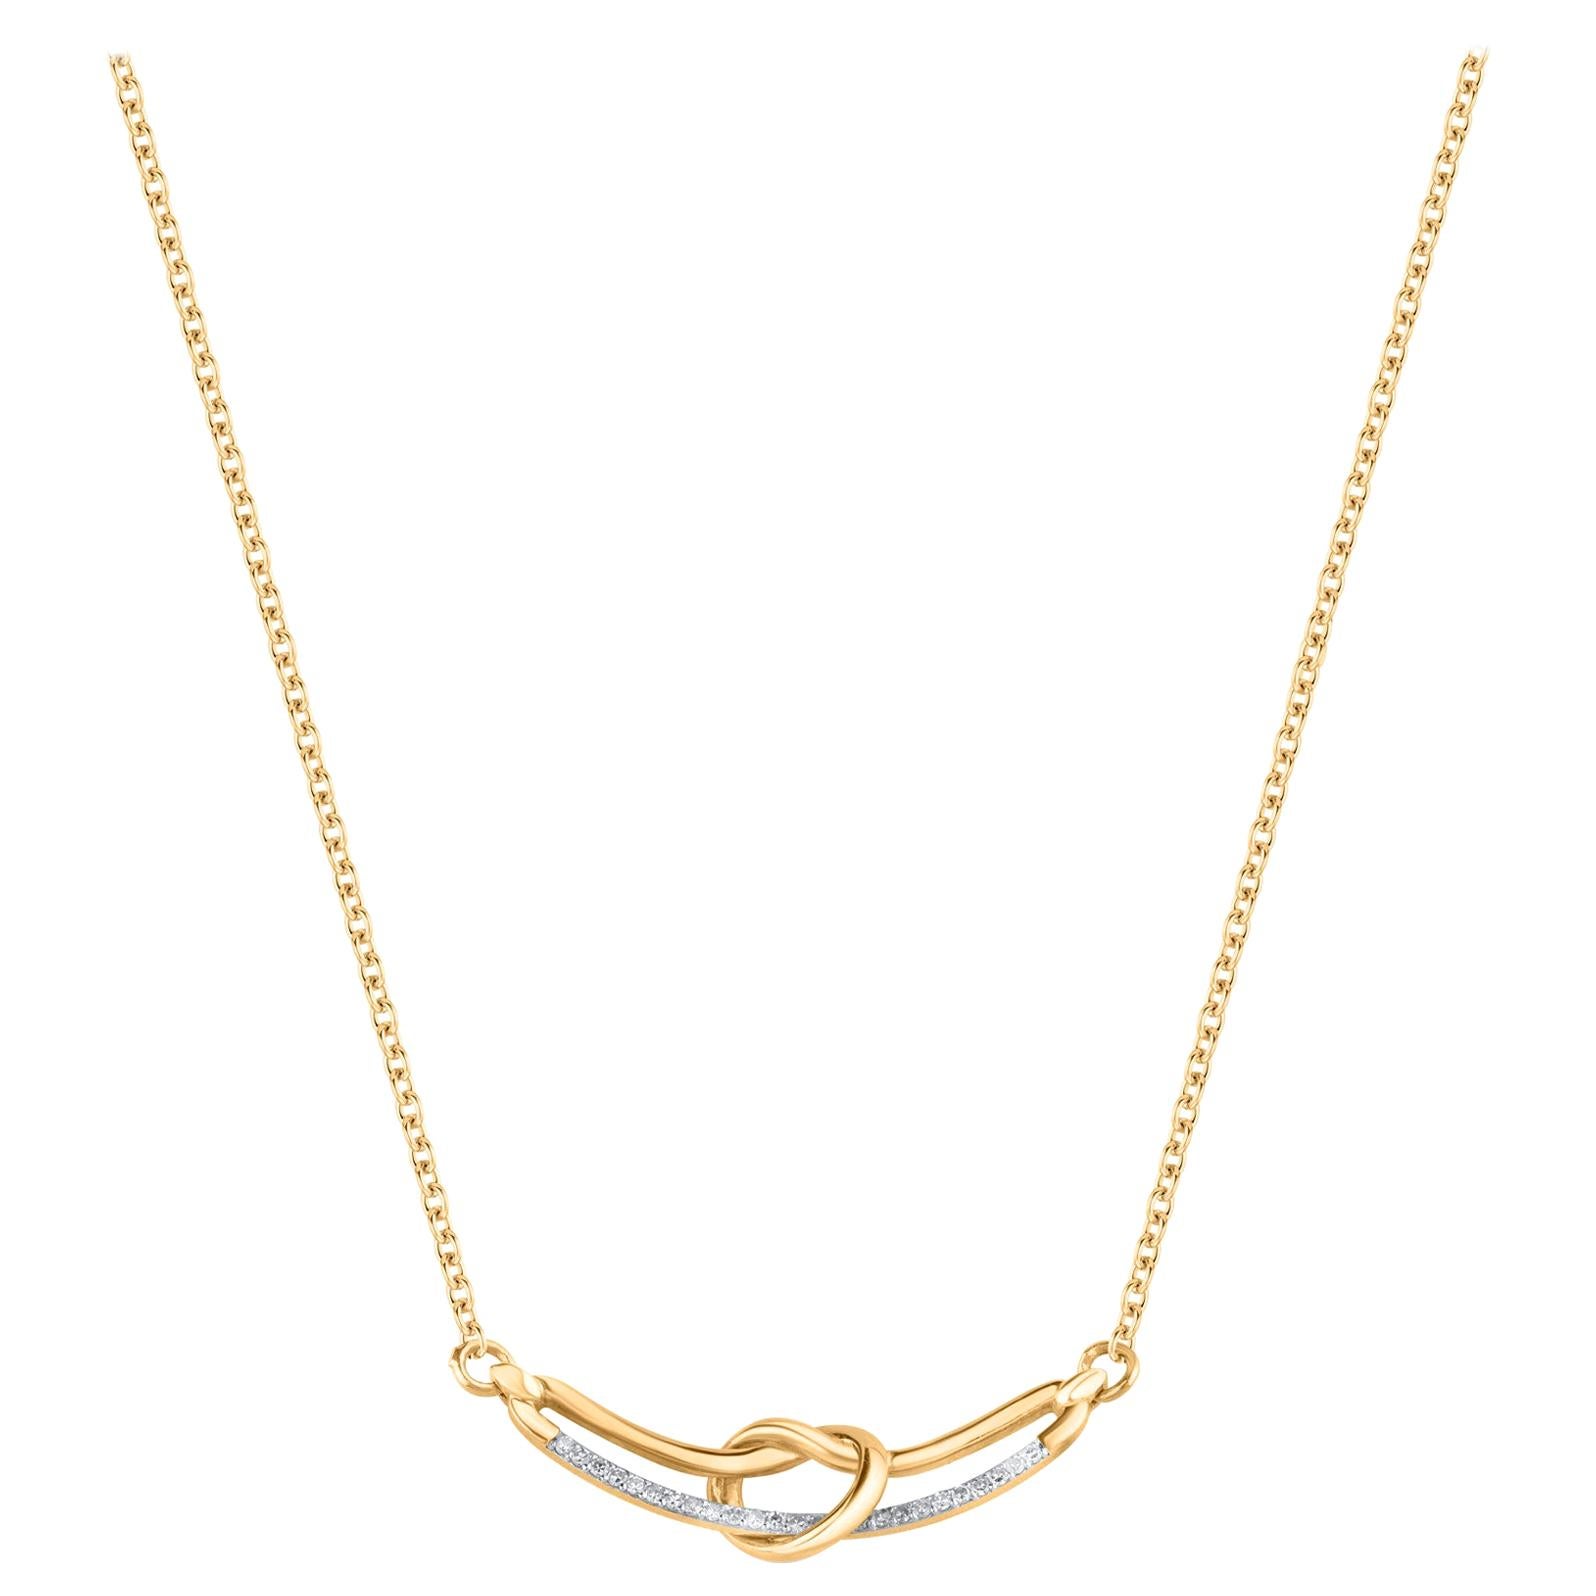 TJD 0.15 Carat Diamond 18Karat Yellow Gold Love Knot Necklace with 18 inch Chain For Sale